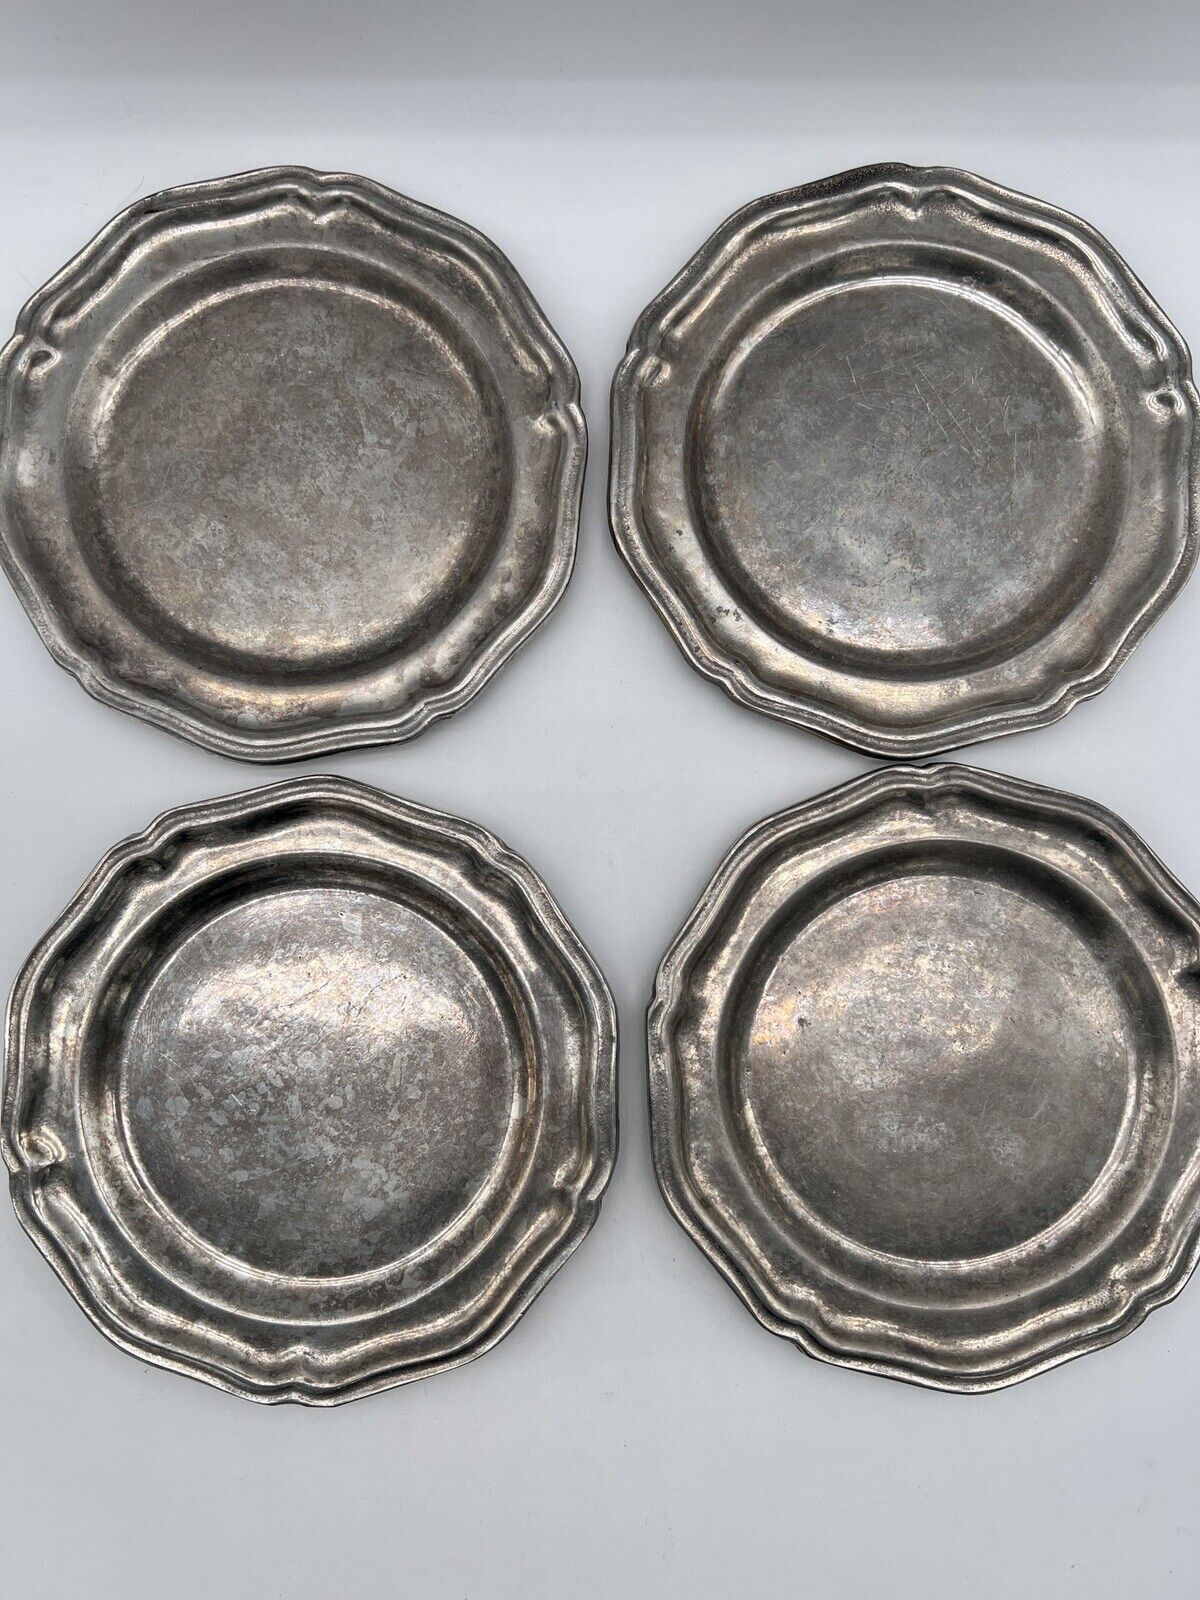 Wilton Columbia Pewter Bread And Butter Plates Queen Anne 7” Set Of 4